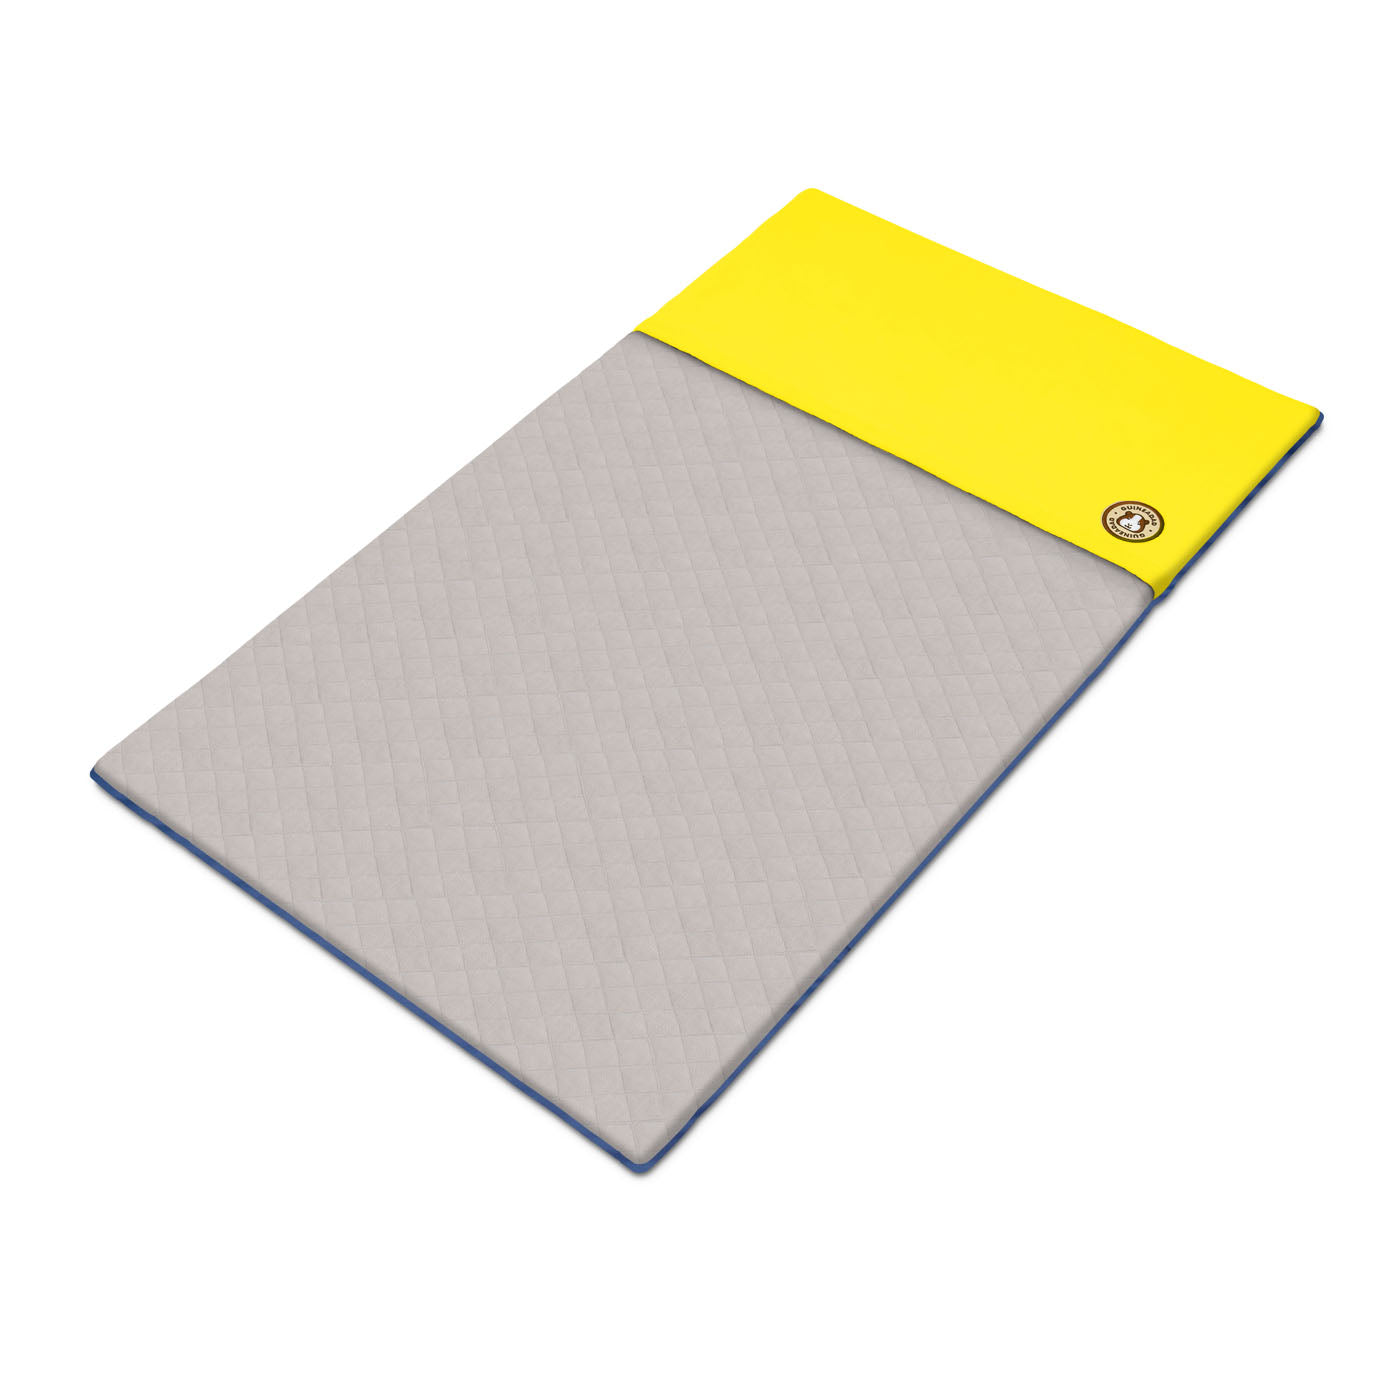  A GuineaDad Original Liner with a yellow pocket, offering a snug and stylish space for guinea pigs. Its eco-friendly, absorbent fabric ensures easy care and a healthy habitat​